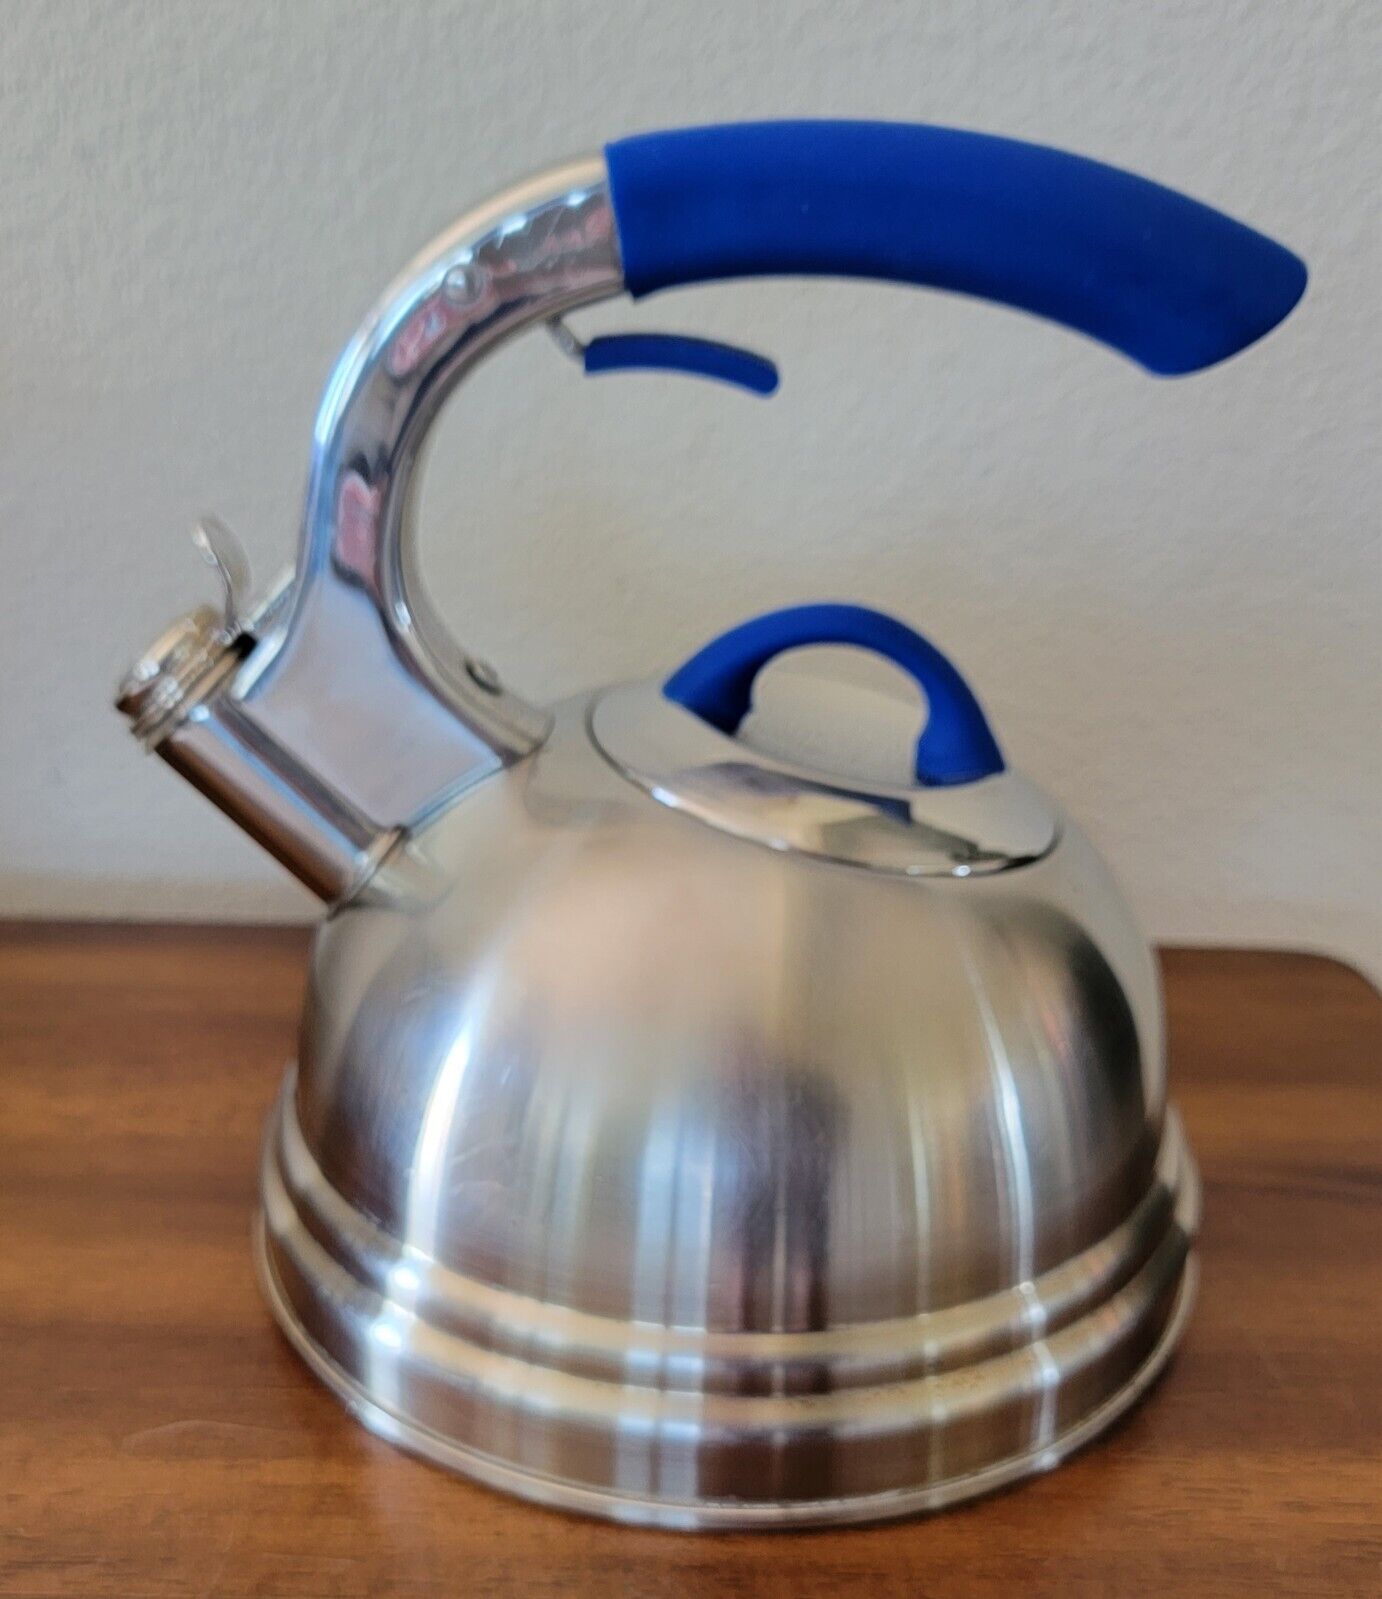 Calidad 2.7 QT Professional Quality Stainless Steel Tea Kettle in Colbalt Blue